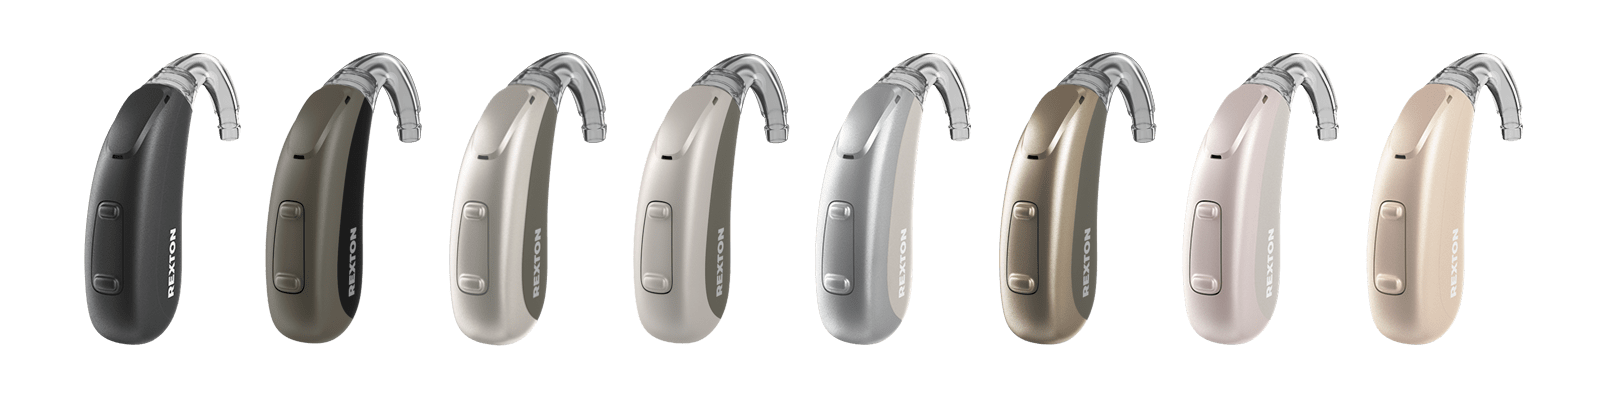 Color range for Rexotn Bicore Rugged hearing aids